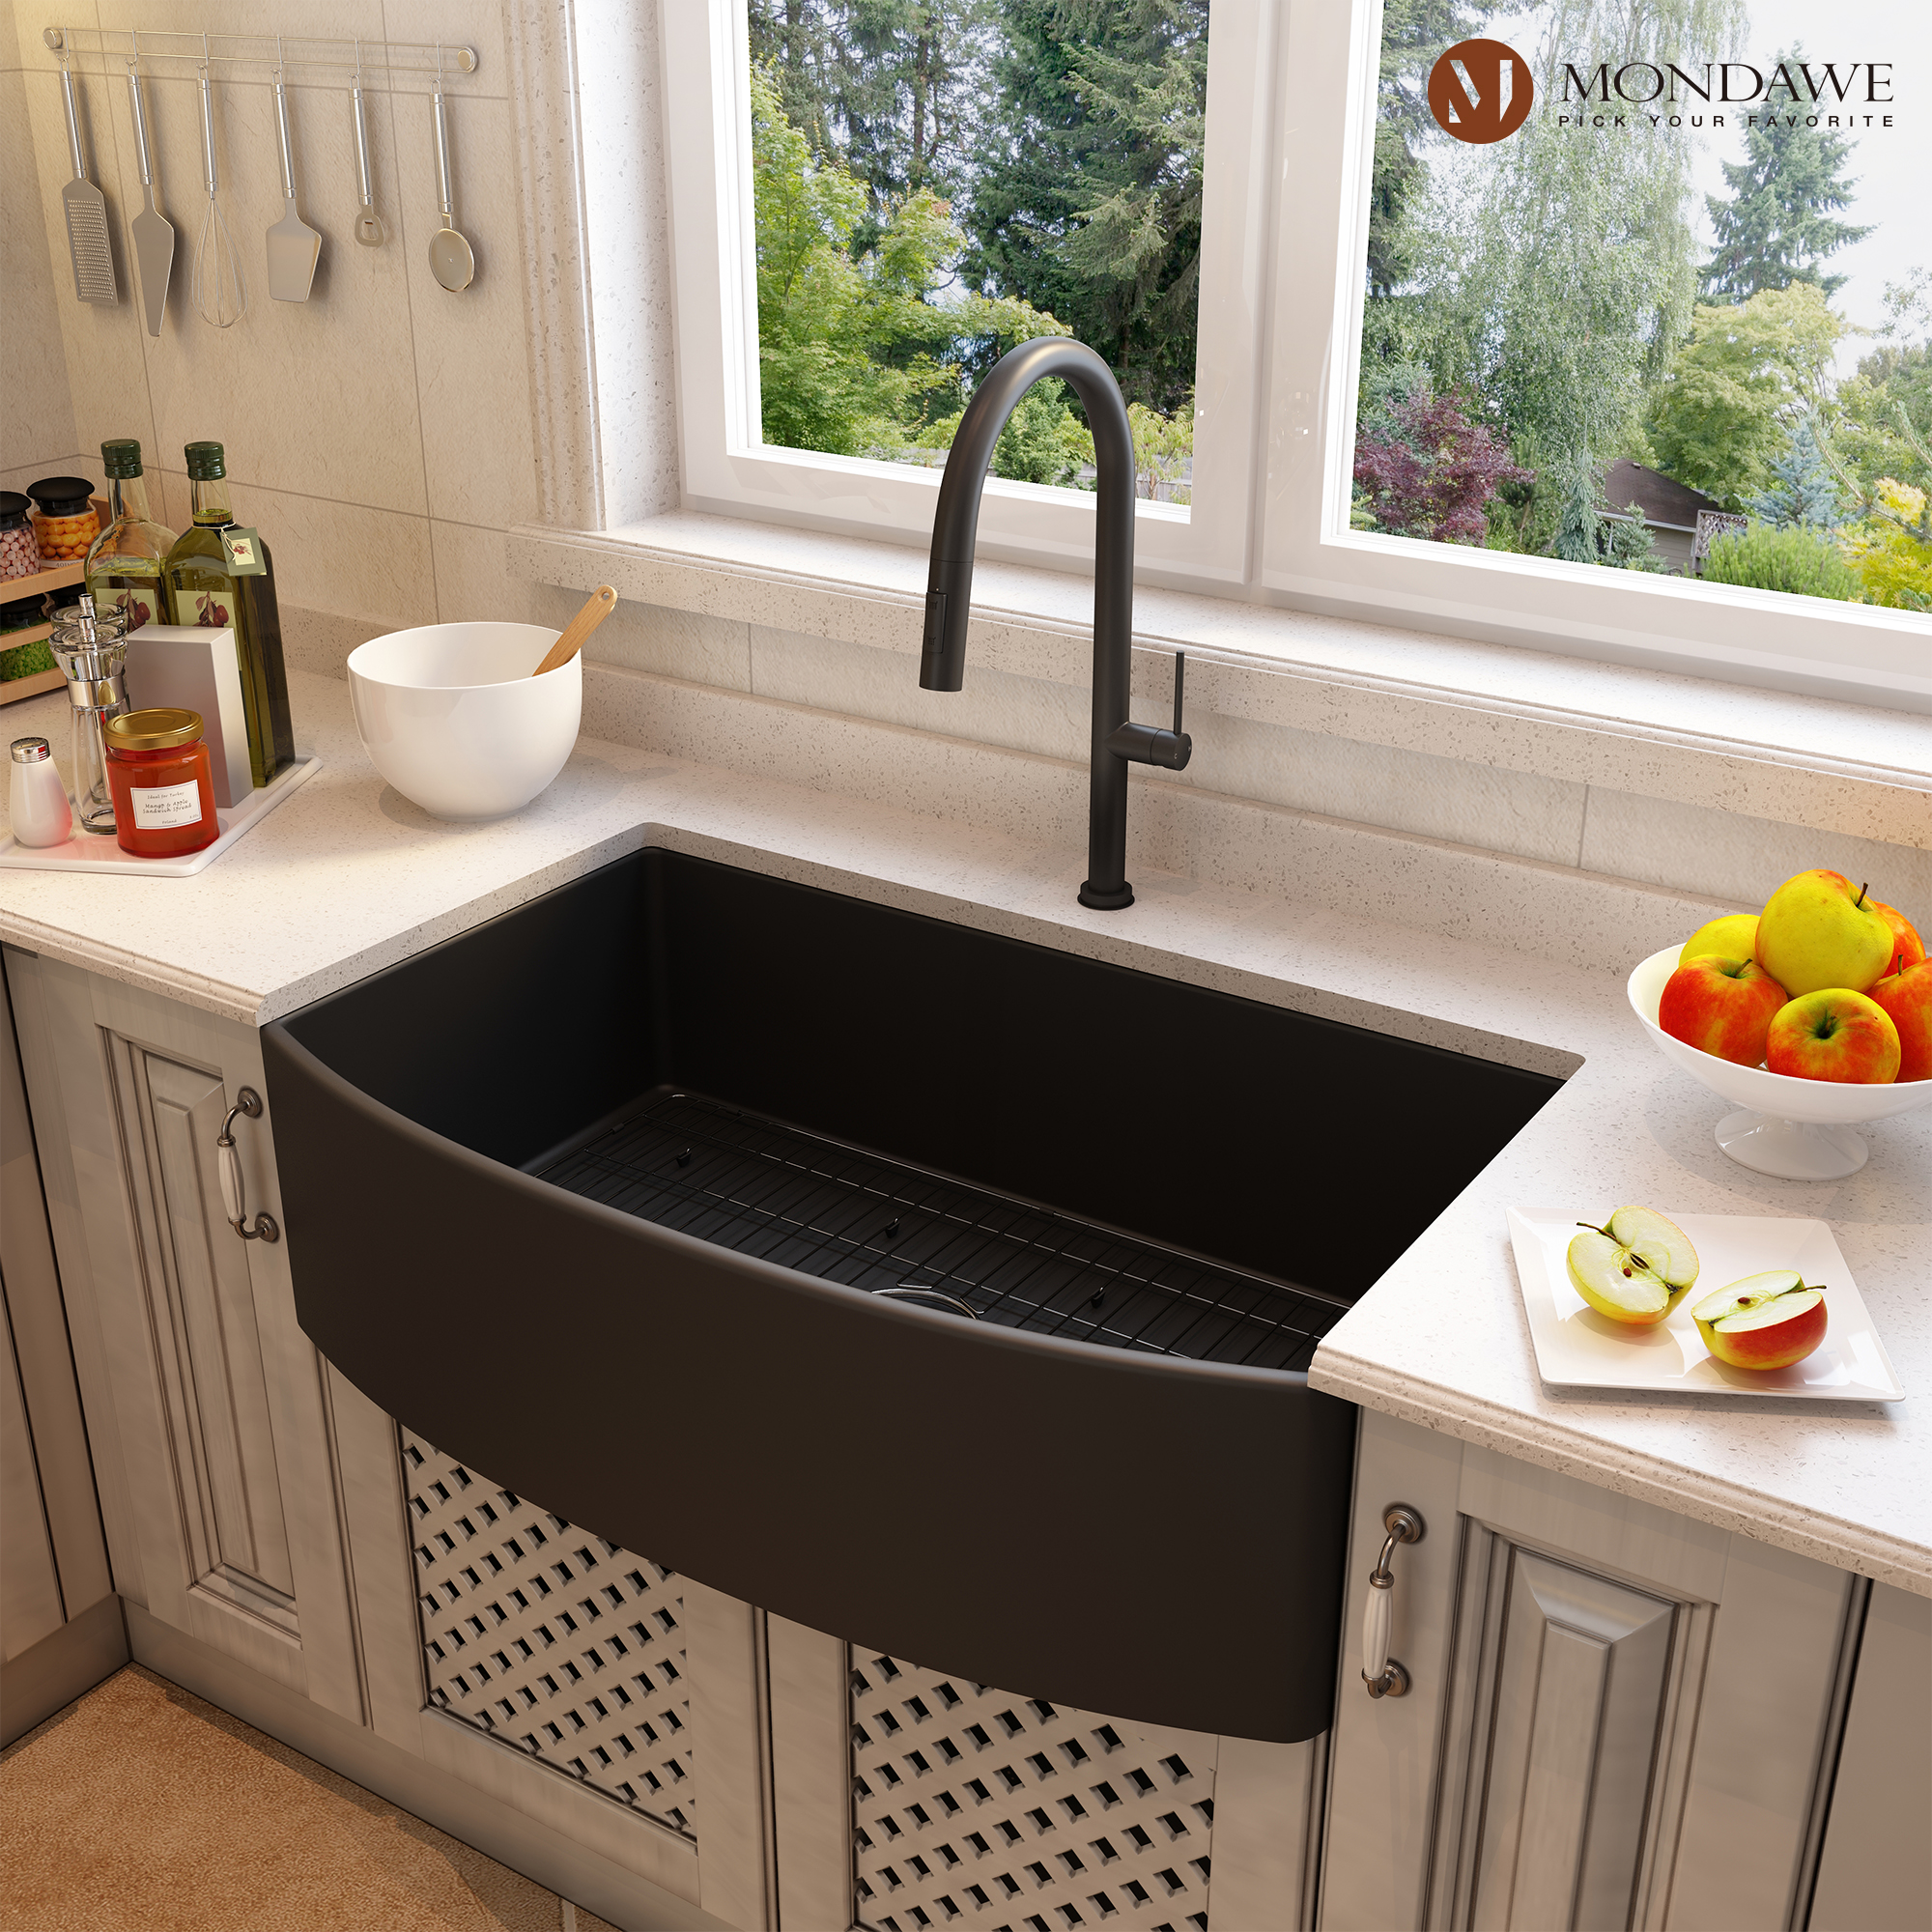 Farmhouse 33 in. single bowl fireclay kitchen sink in white comes with stainless steel bottom grid and strainer-Mondawe